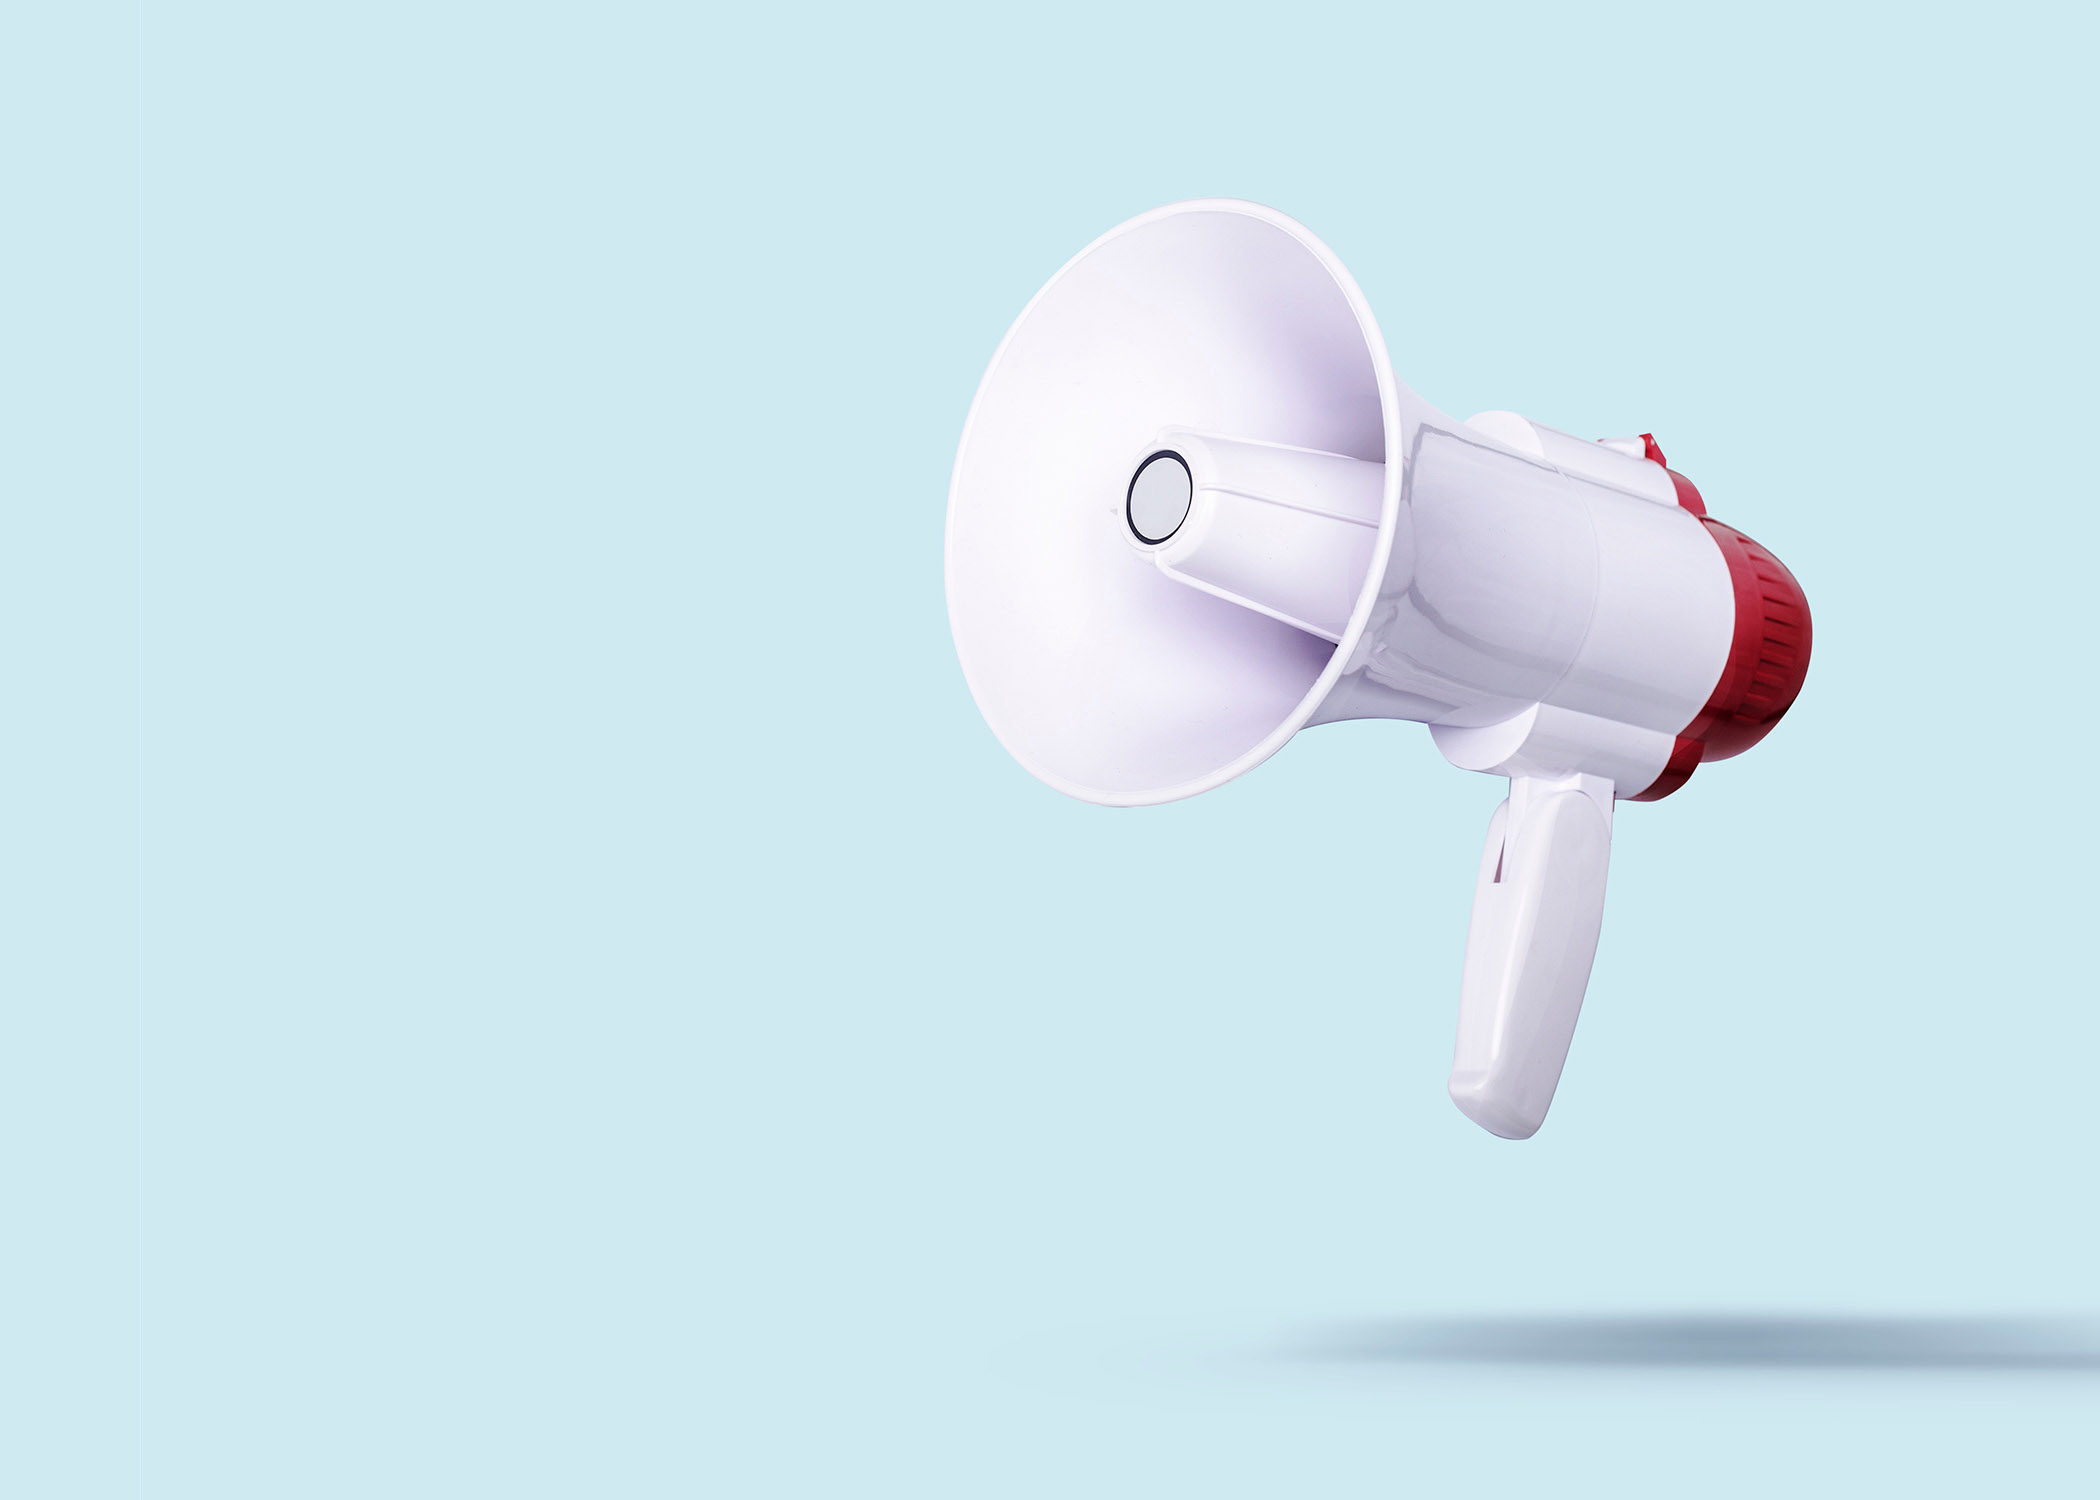 white megaphone flies on a light background. Advertising and messages concept. Banner.